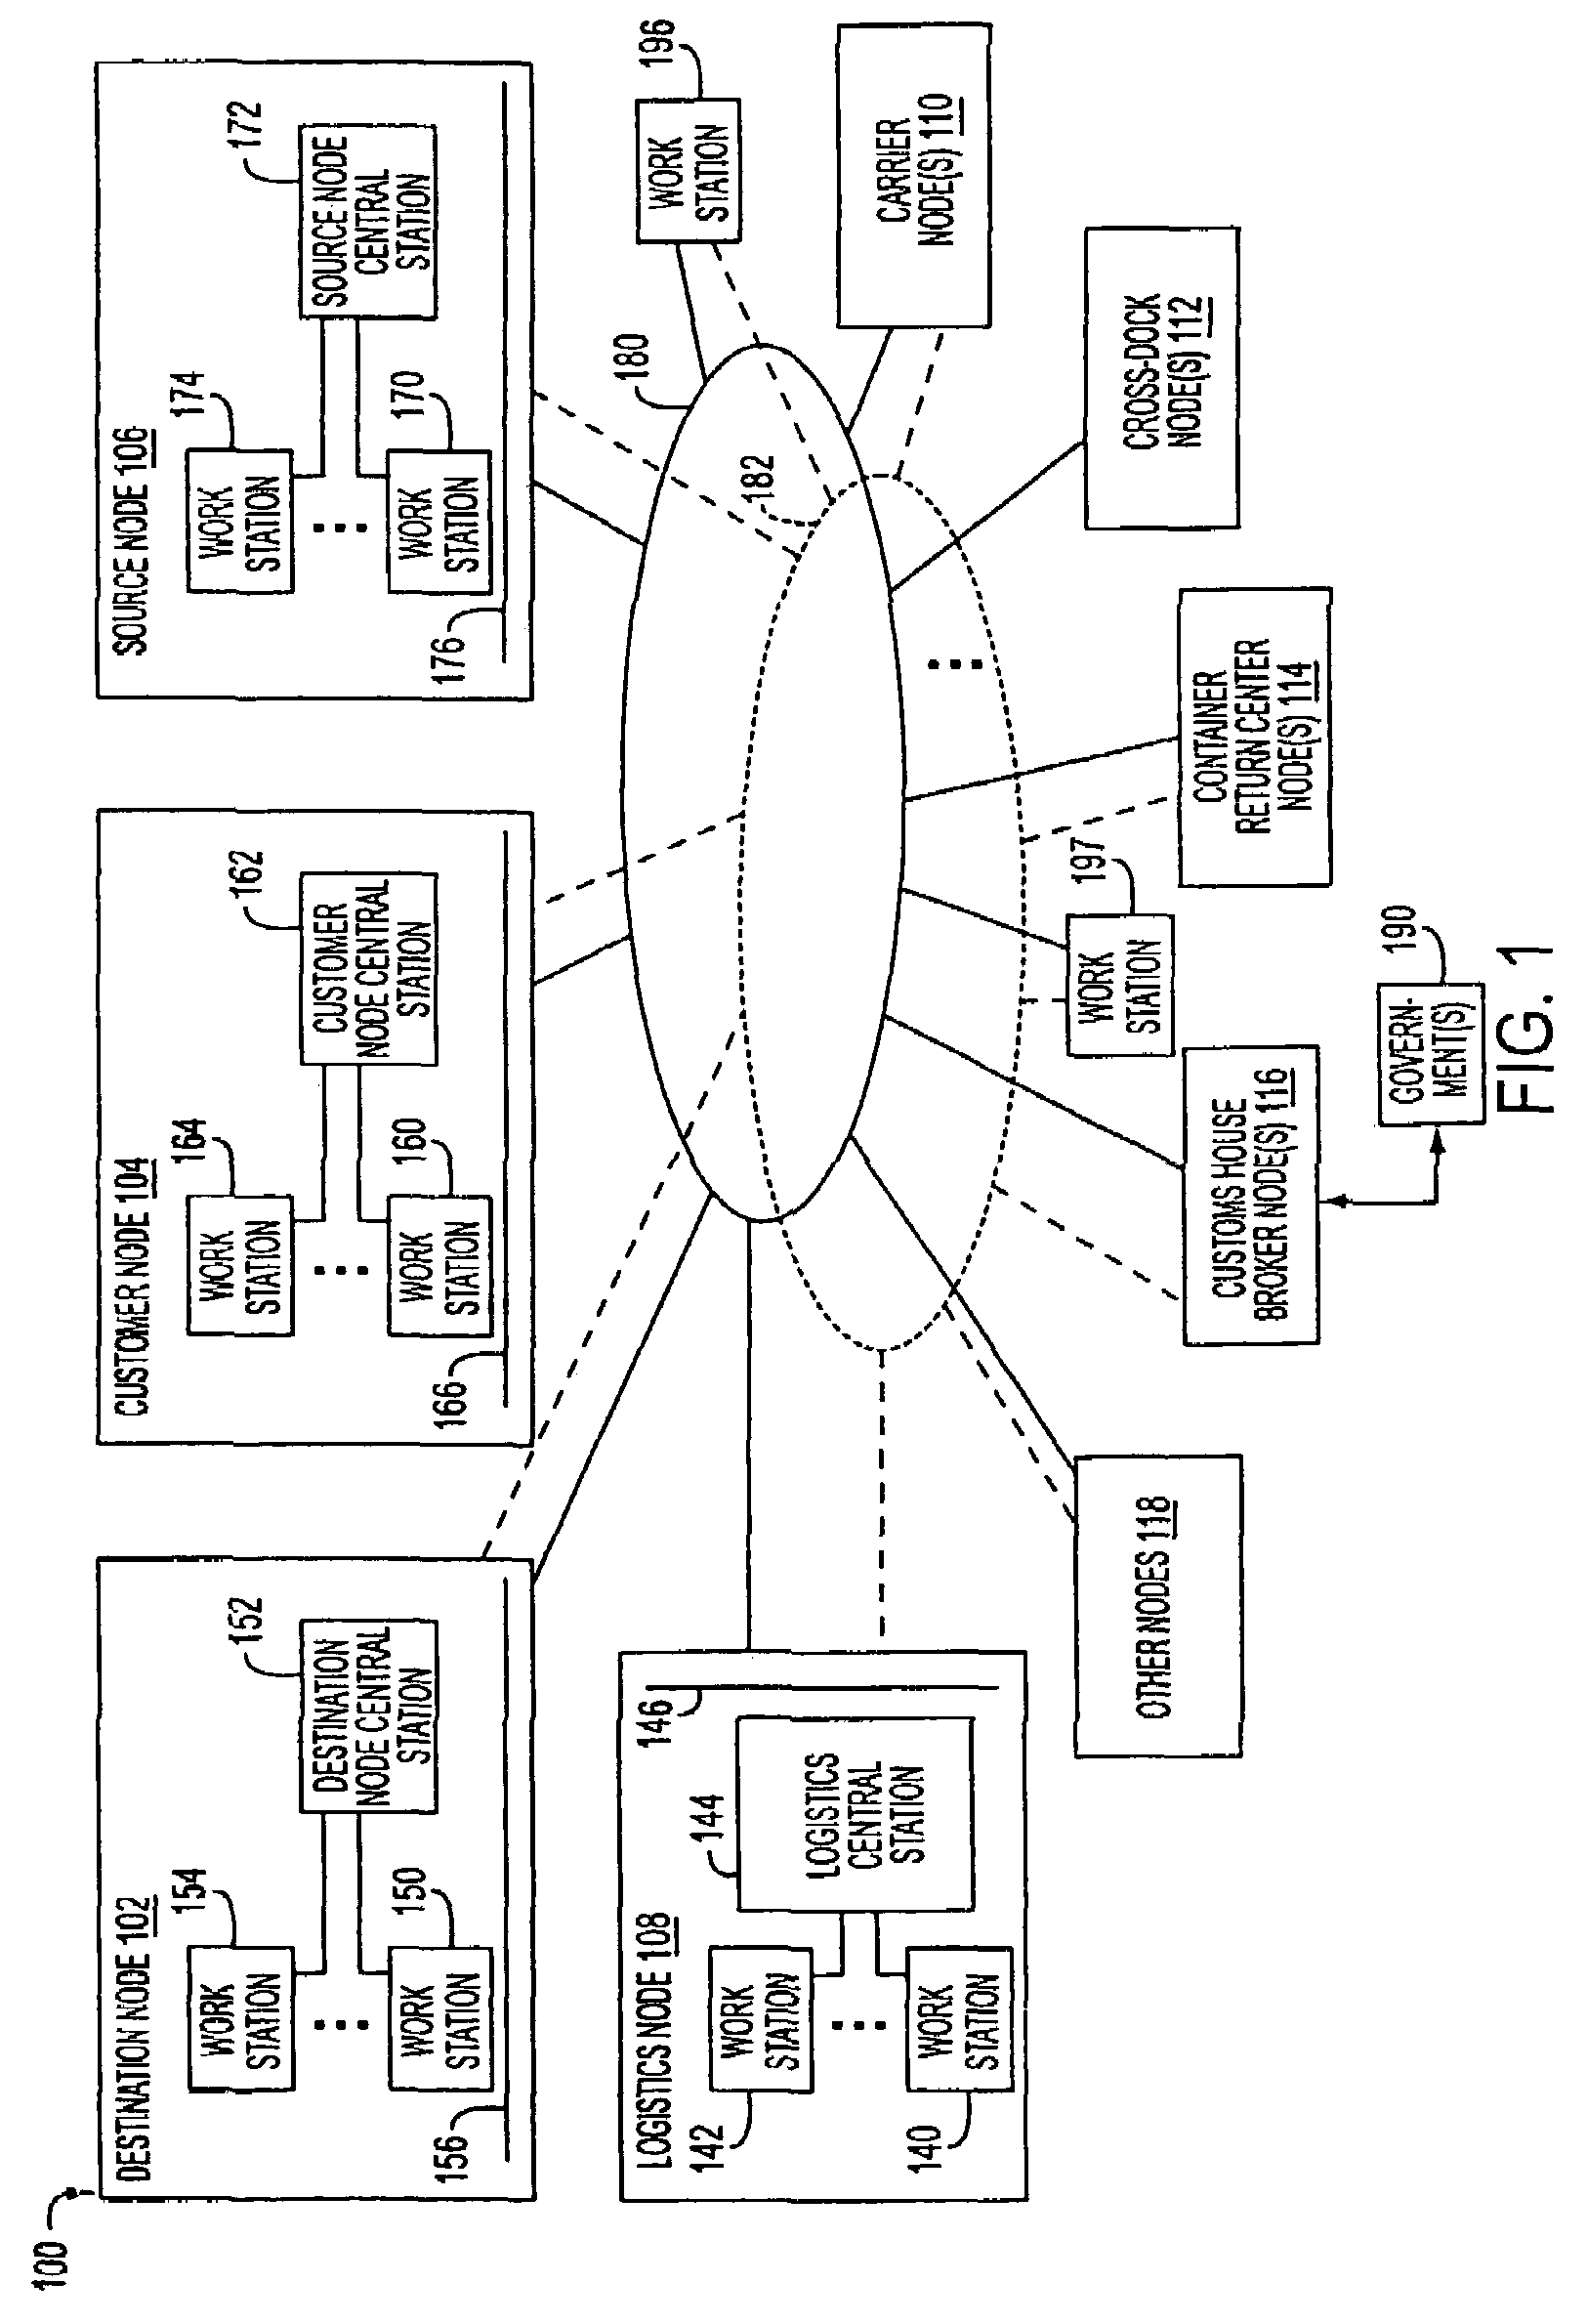 Method and system for interfacing with a shipping service